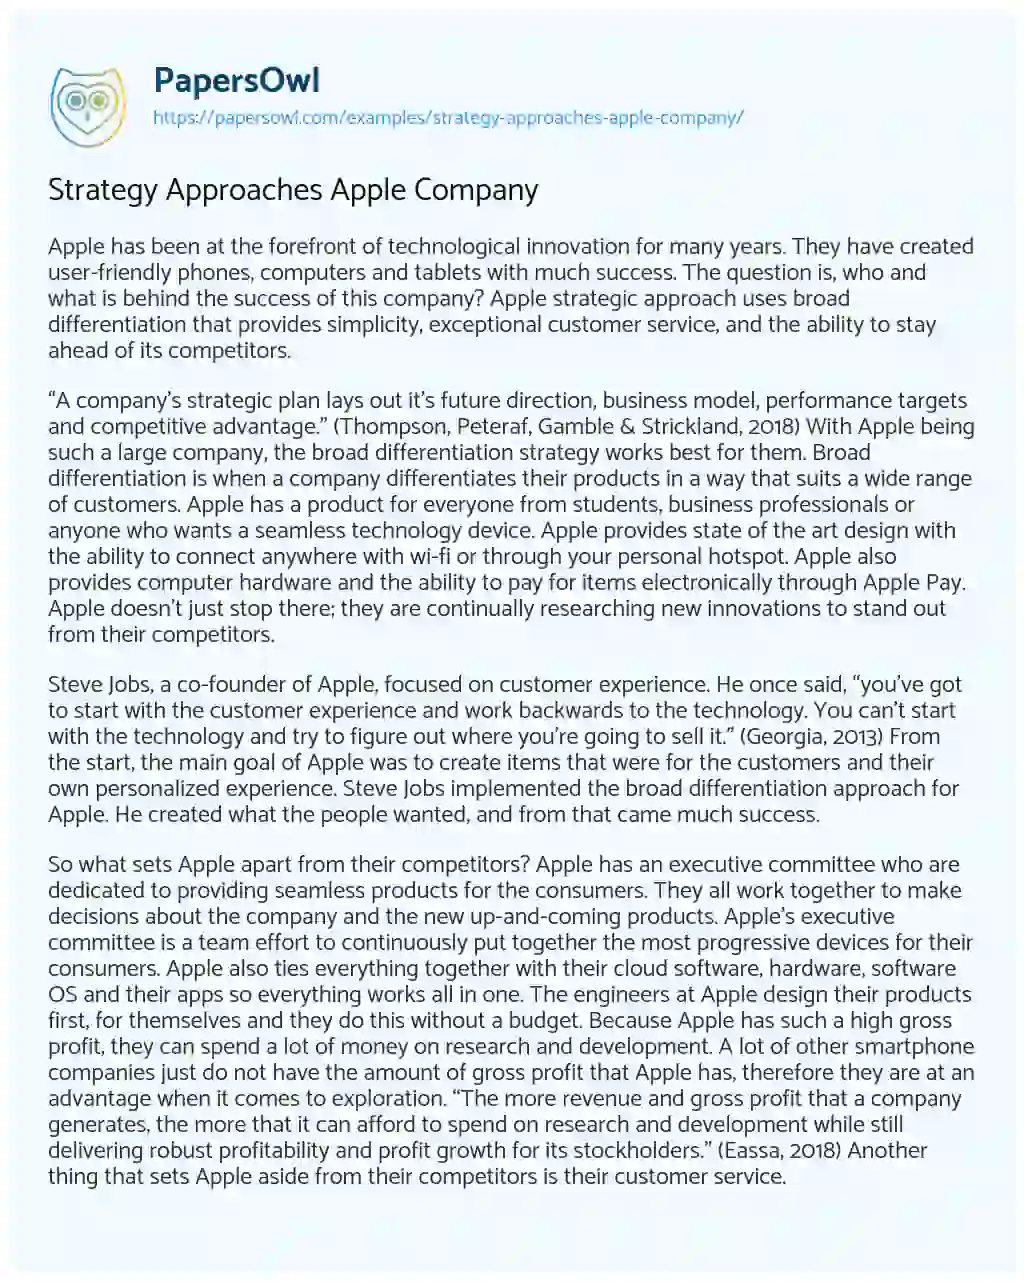 Strategy Approaches Apple Company essay